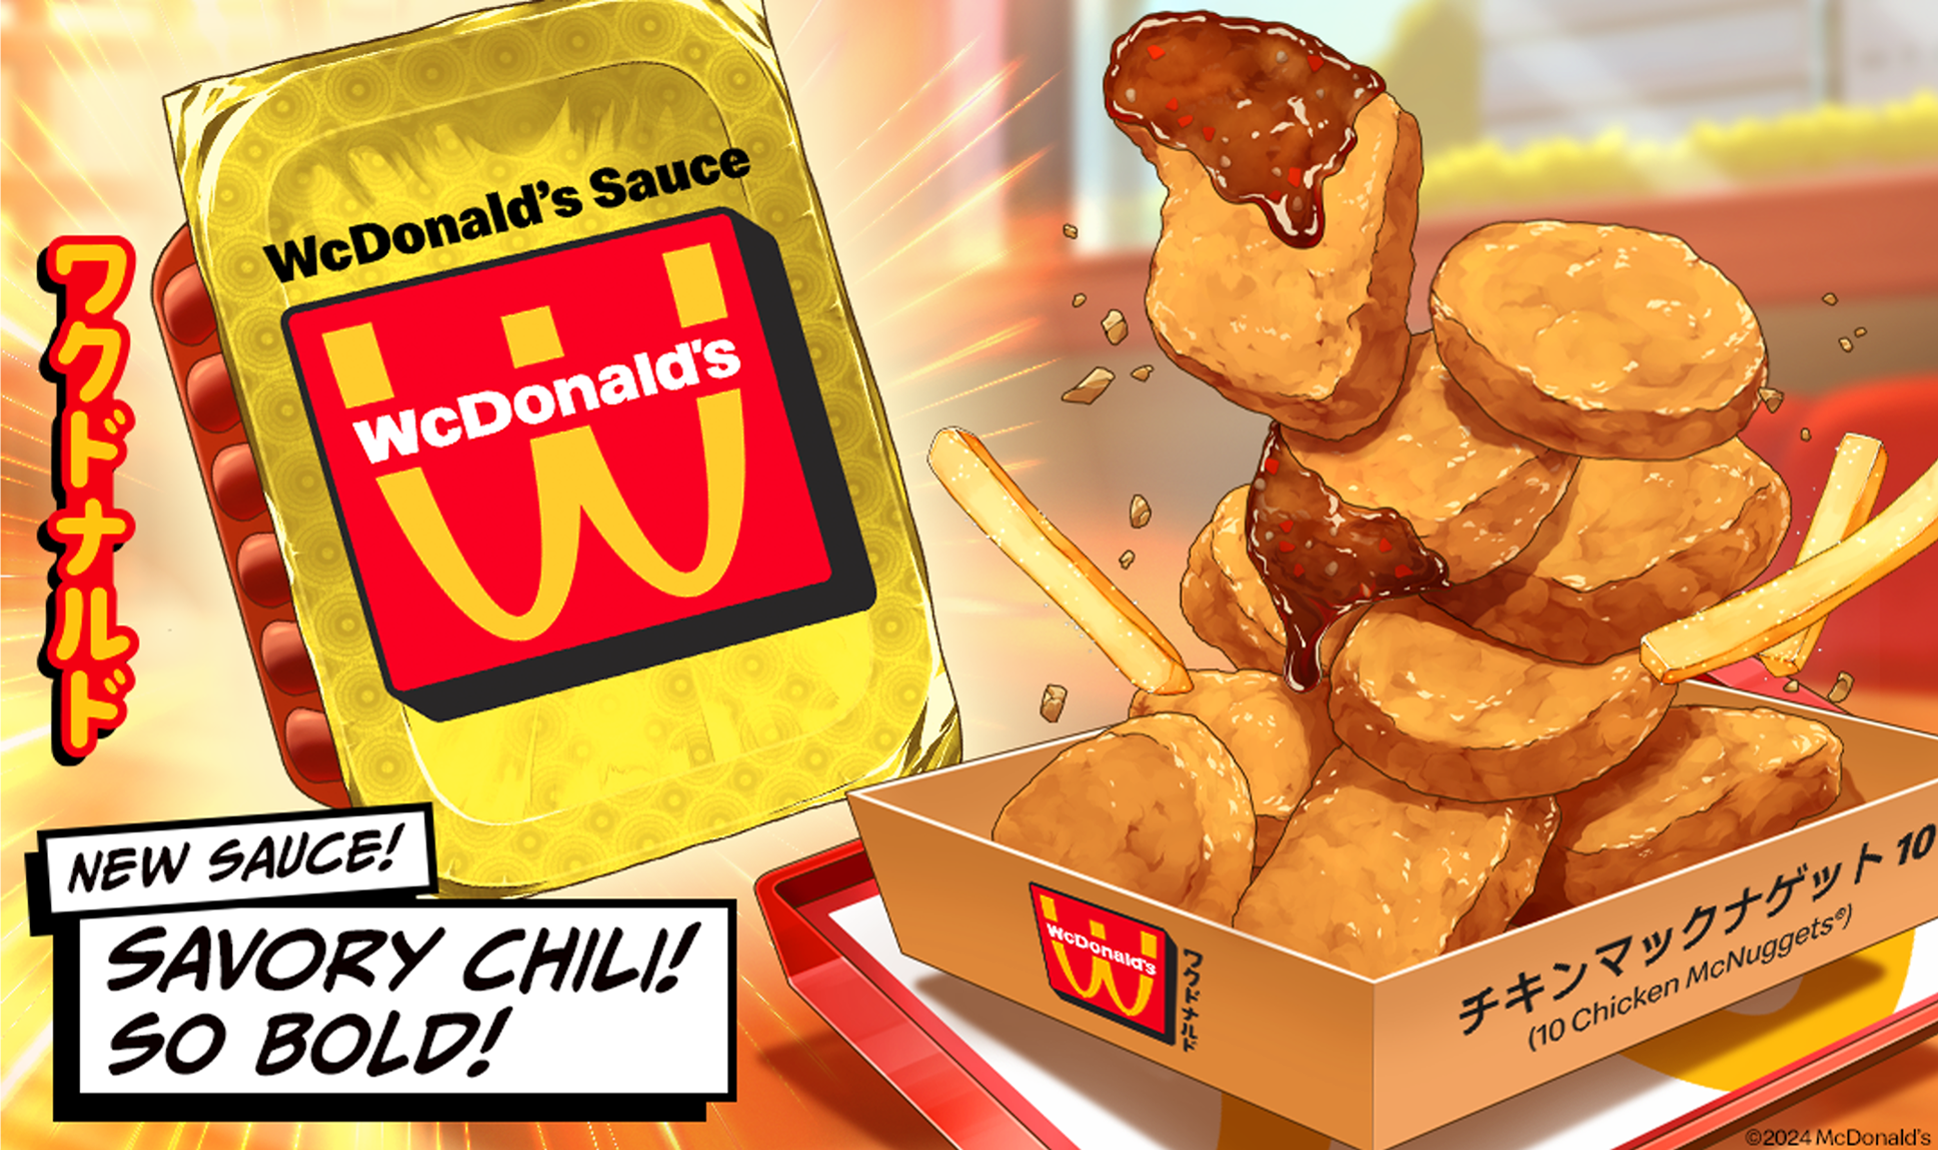 WcDonald's retail promotion poster with a drawing of McNuggets and the WcDonald's sauce with the text 